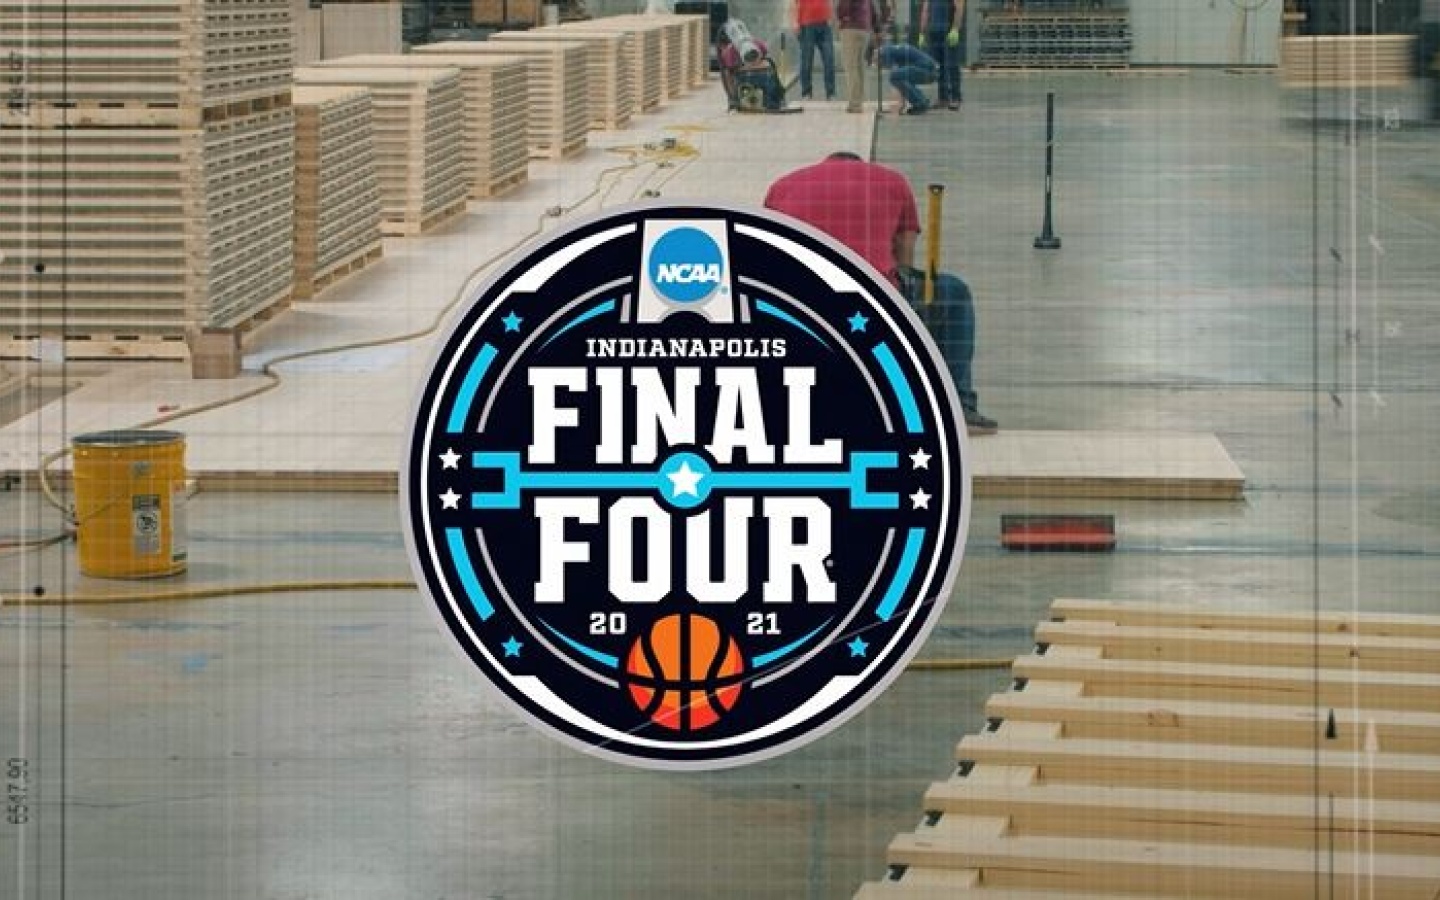 Official Court Supplier of the NCAA Final Four<sup>®</sup>